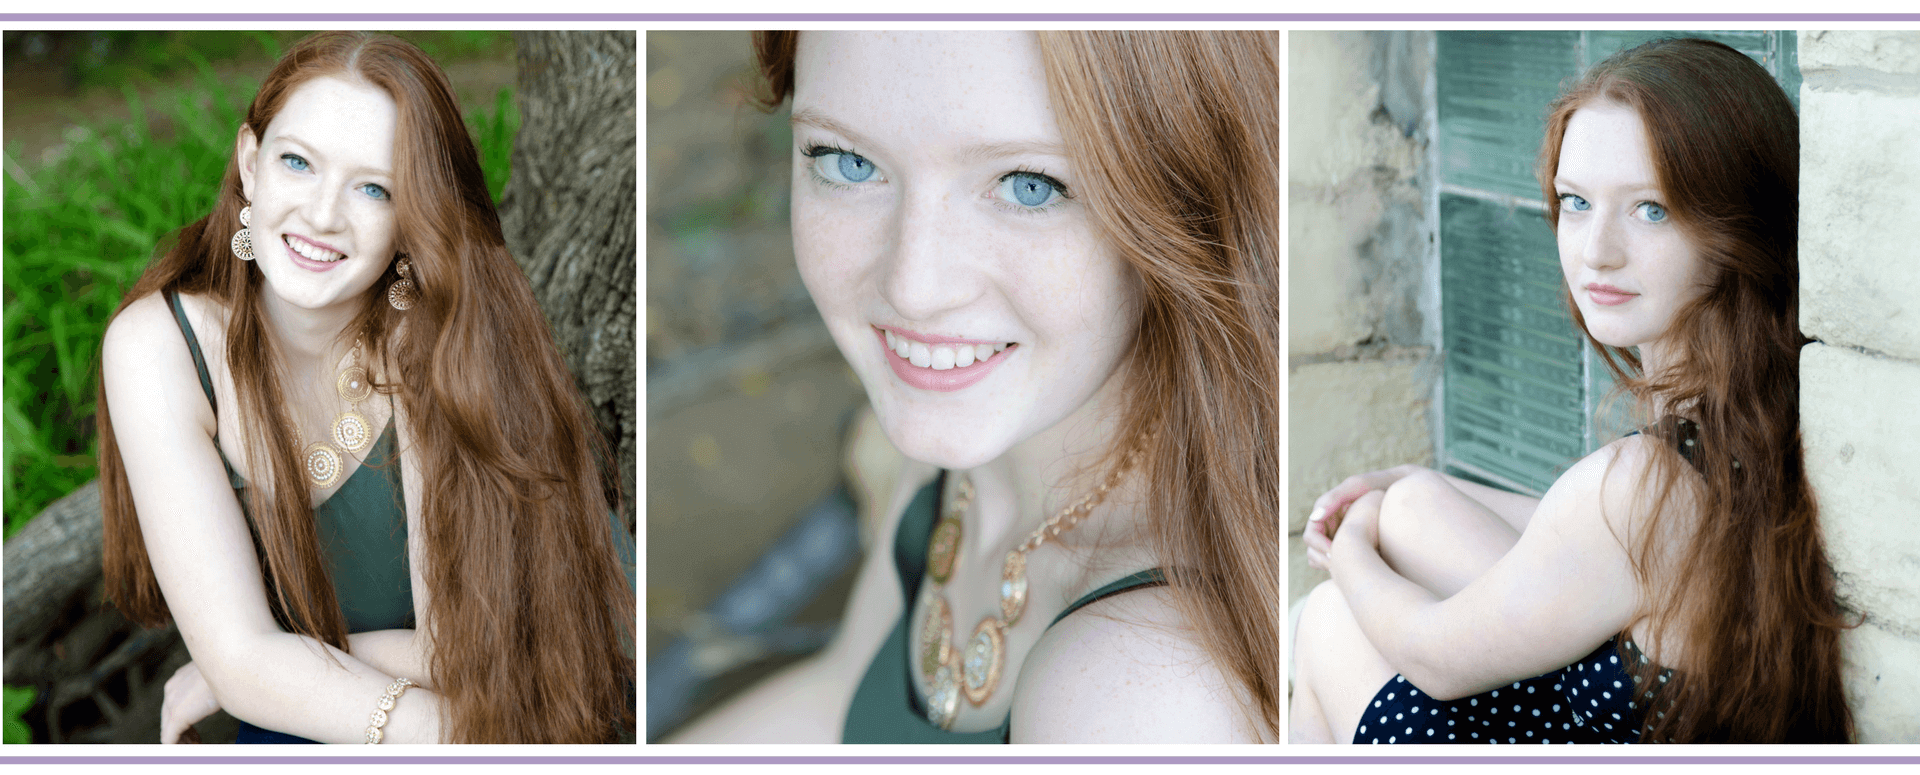 Woodbury MN Photographer | Professional Sr. Portraits | Focus Photography by Susan